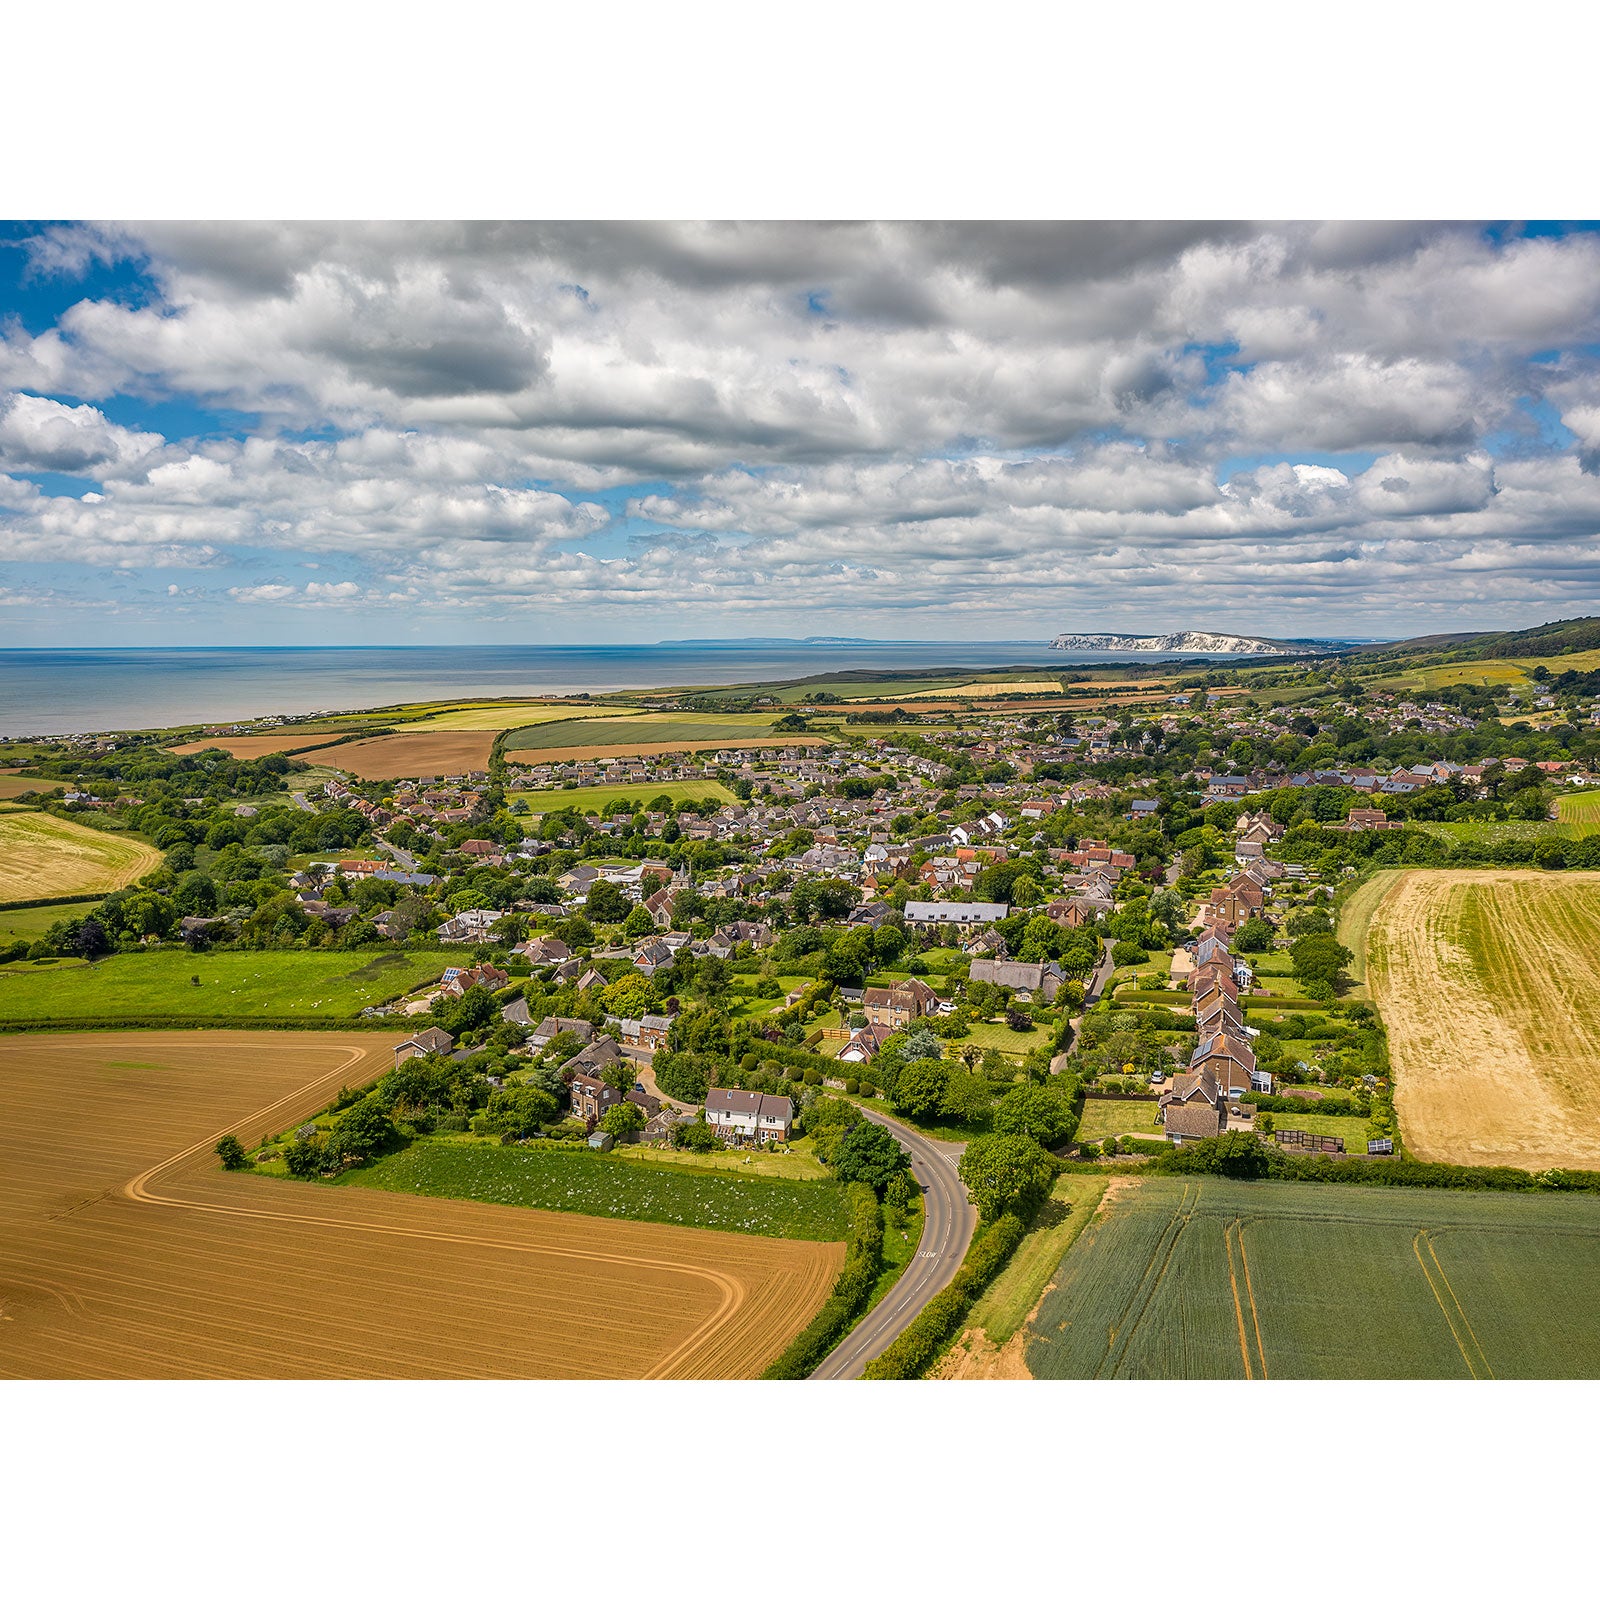 Aerial view of a small village surrounded by fields, with a coastal line and distant hills under a partly cloudy sky. This Brighstone by Available Light Photography description corresponds to image number 1494.